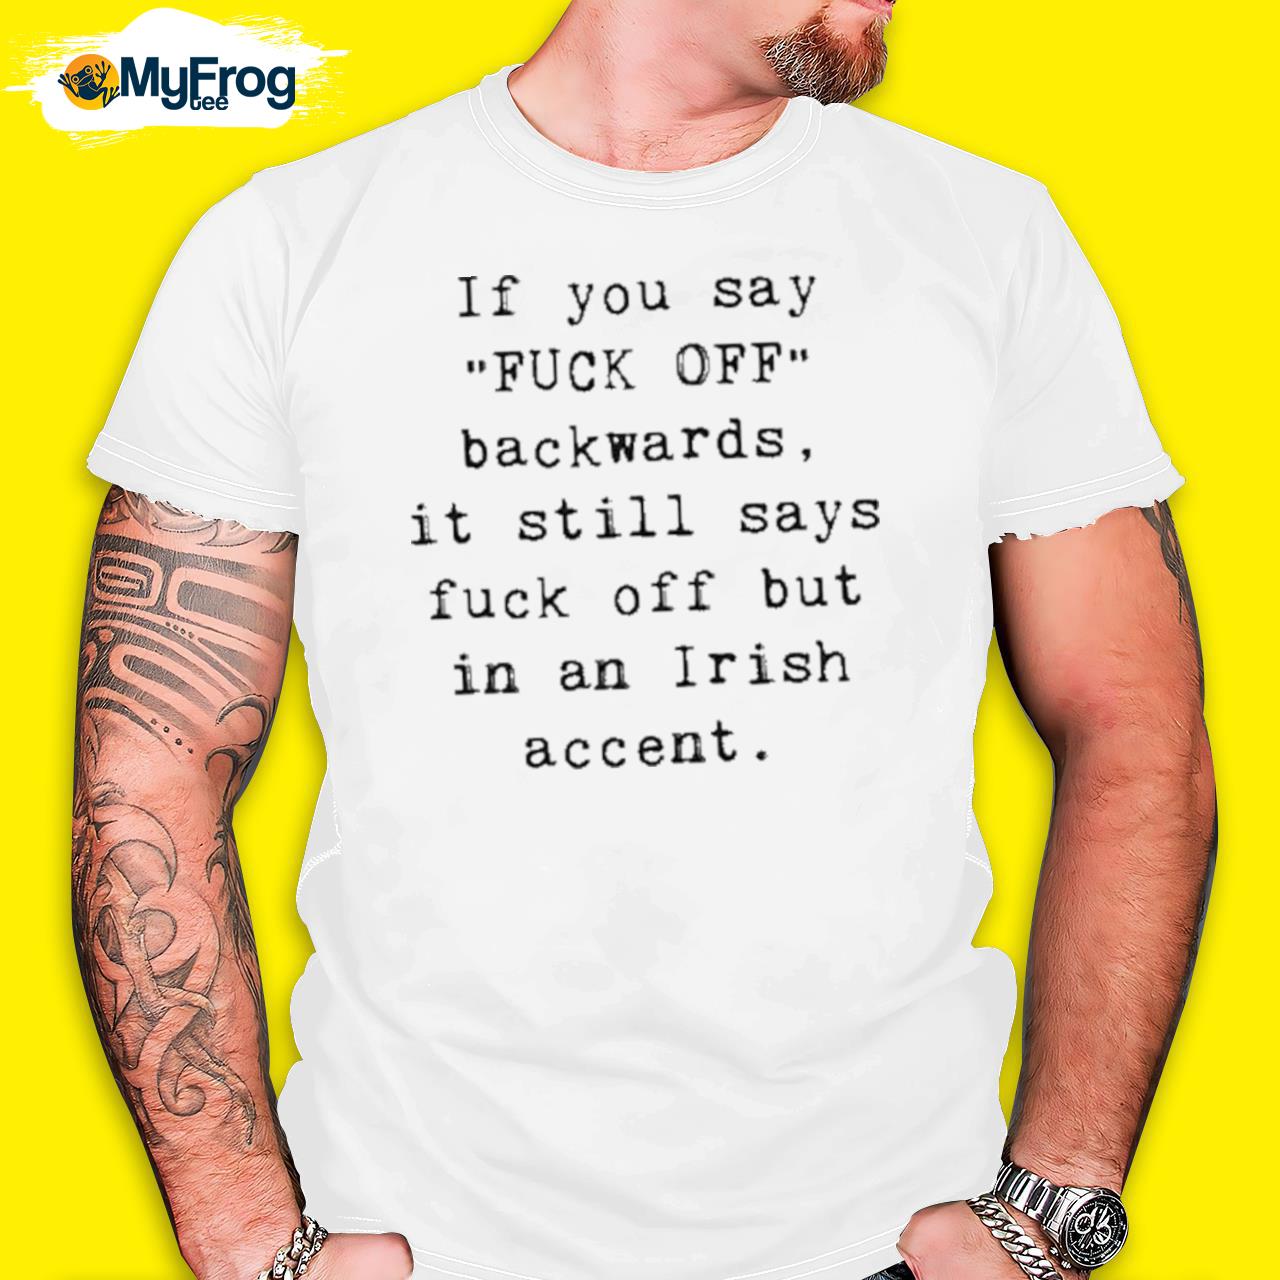 If You Say Fuck Off Backwards It Still Says Fuck Off But In An Irish Accent shirt